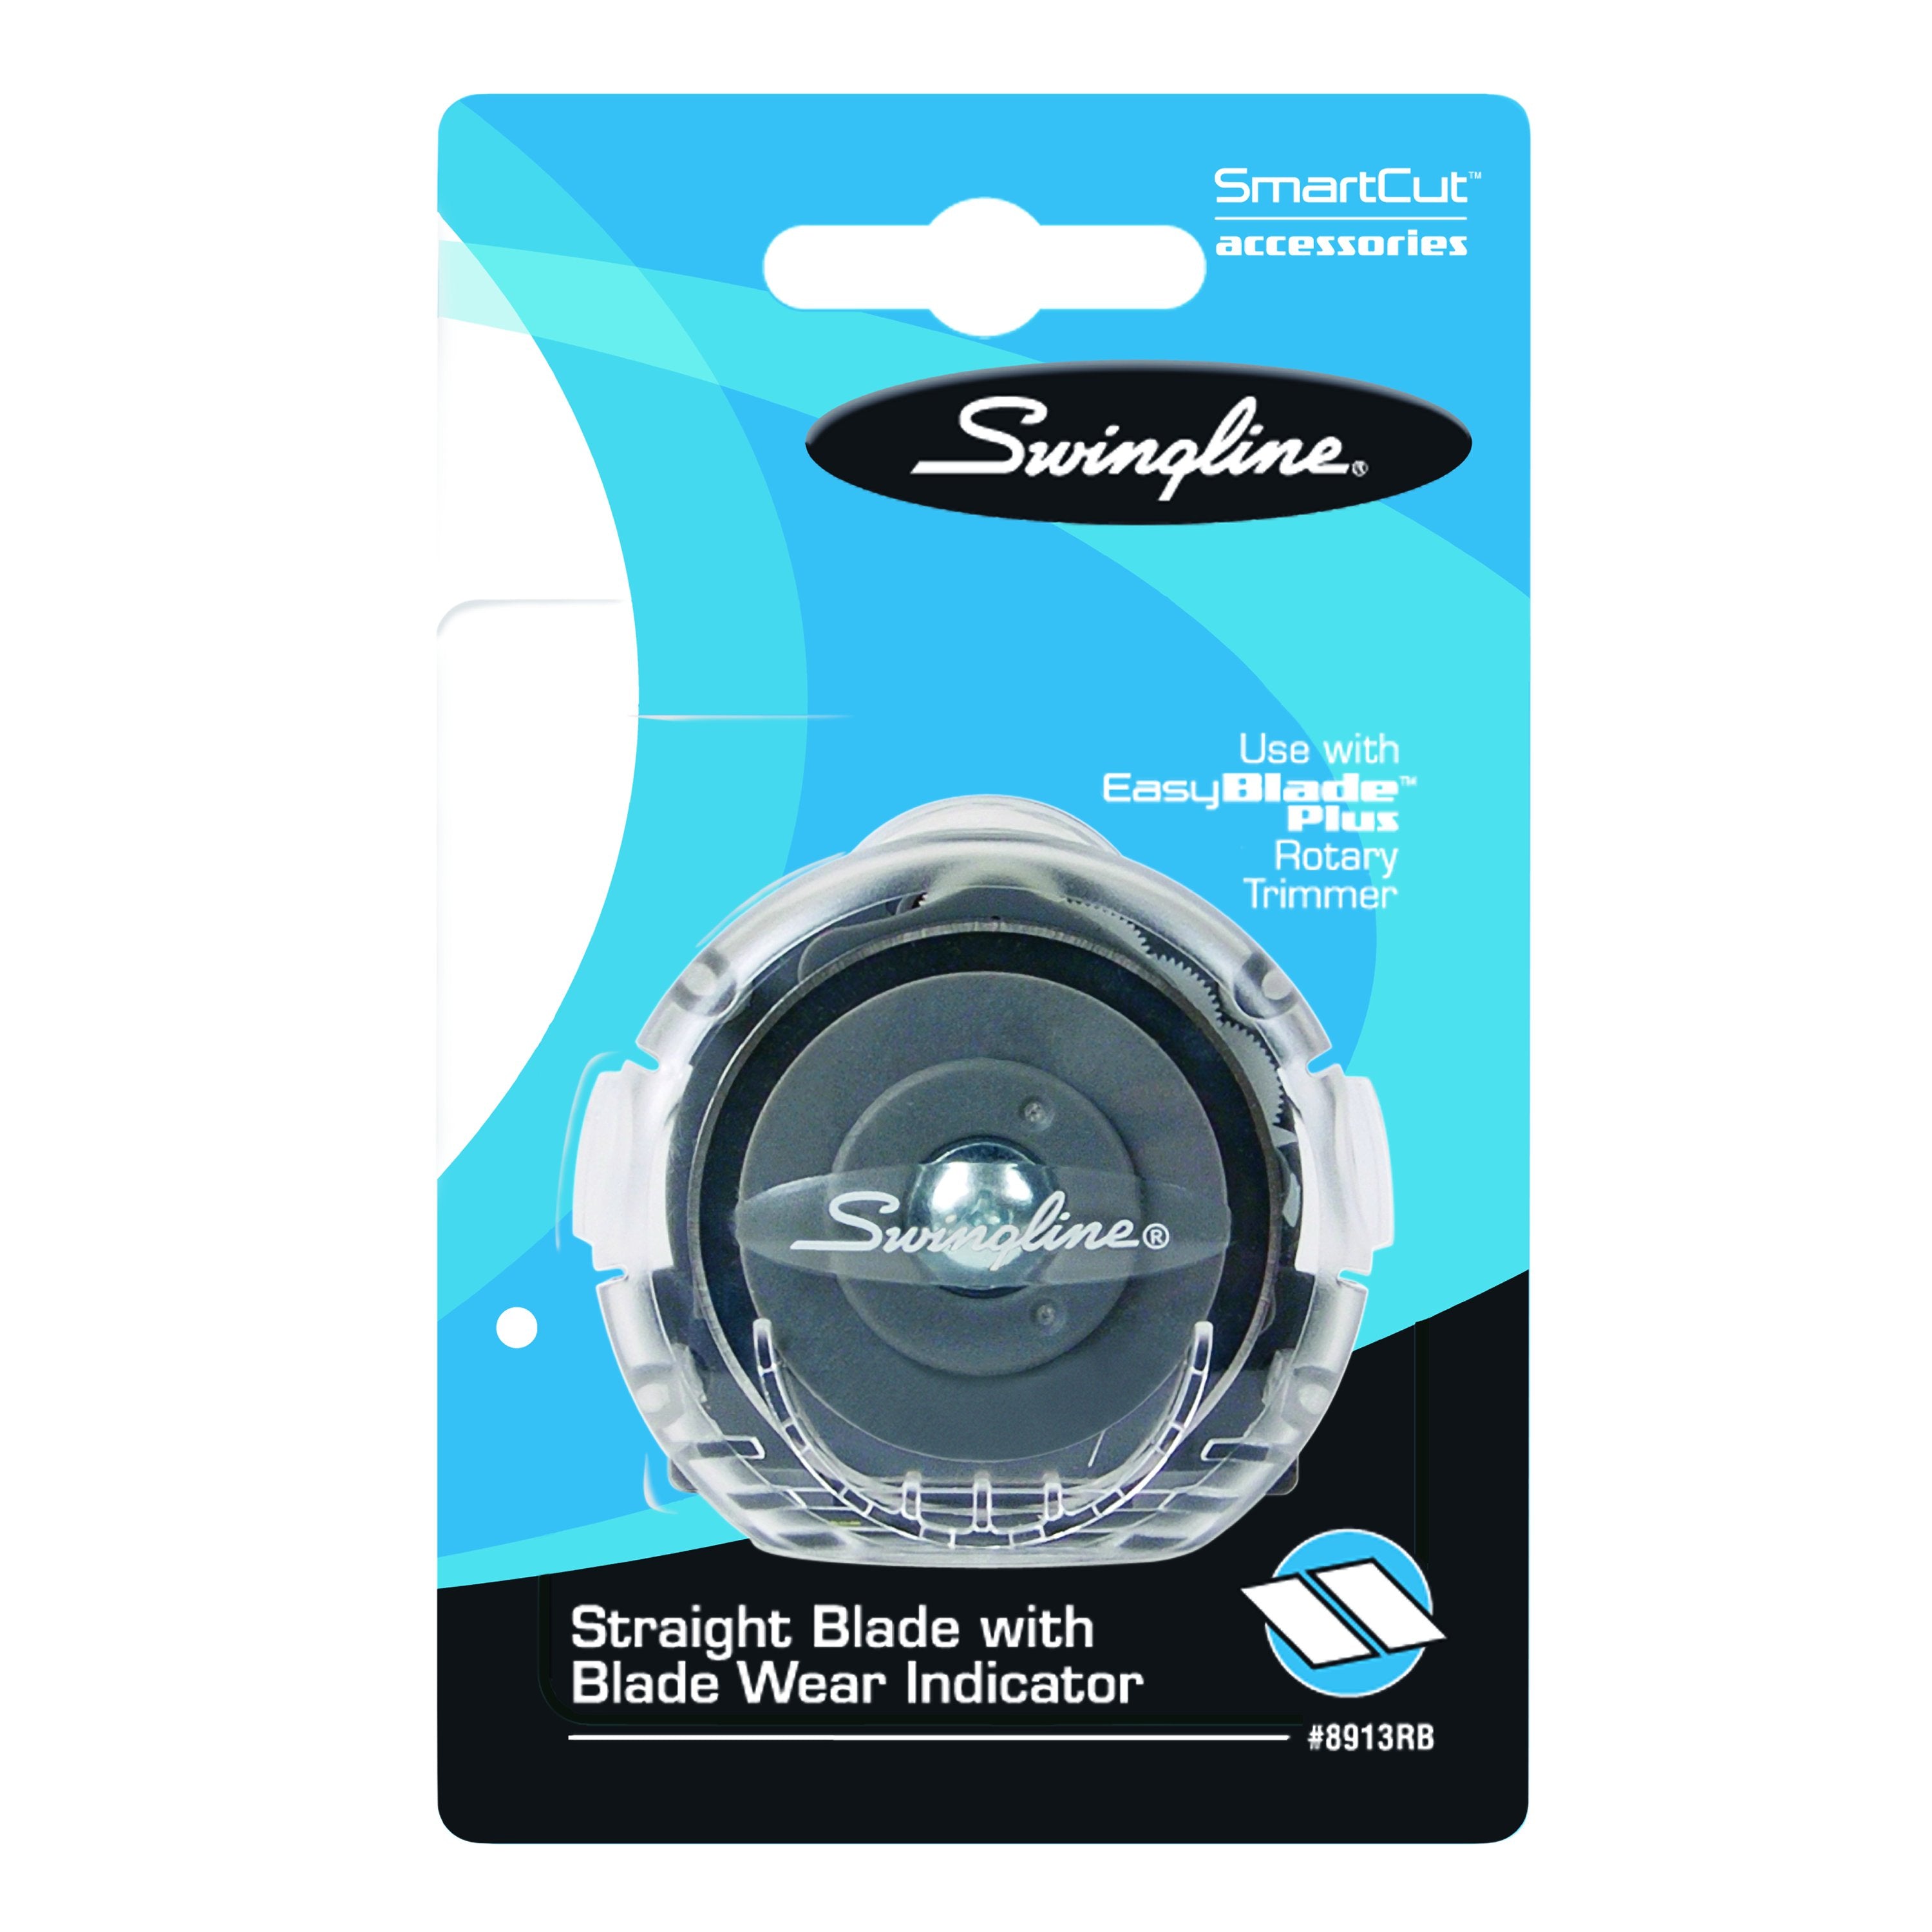 Swingline® SmartCut® EasyBlade™ Plus Rotary Trimmer Replacement Blade - Straight Cut